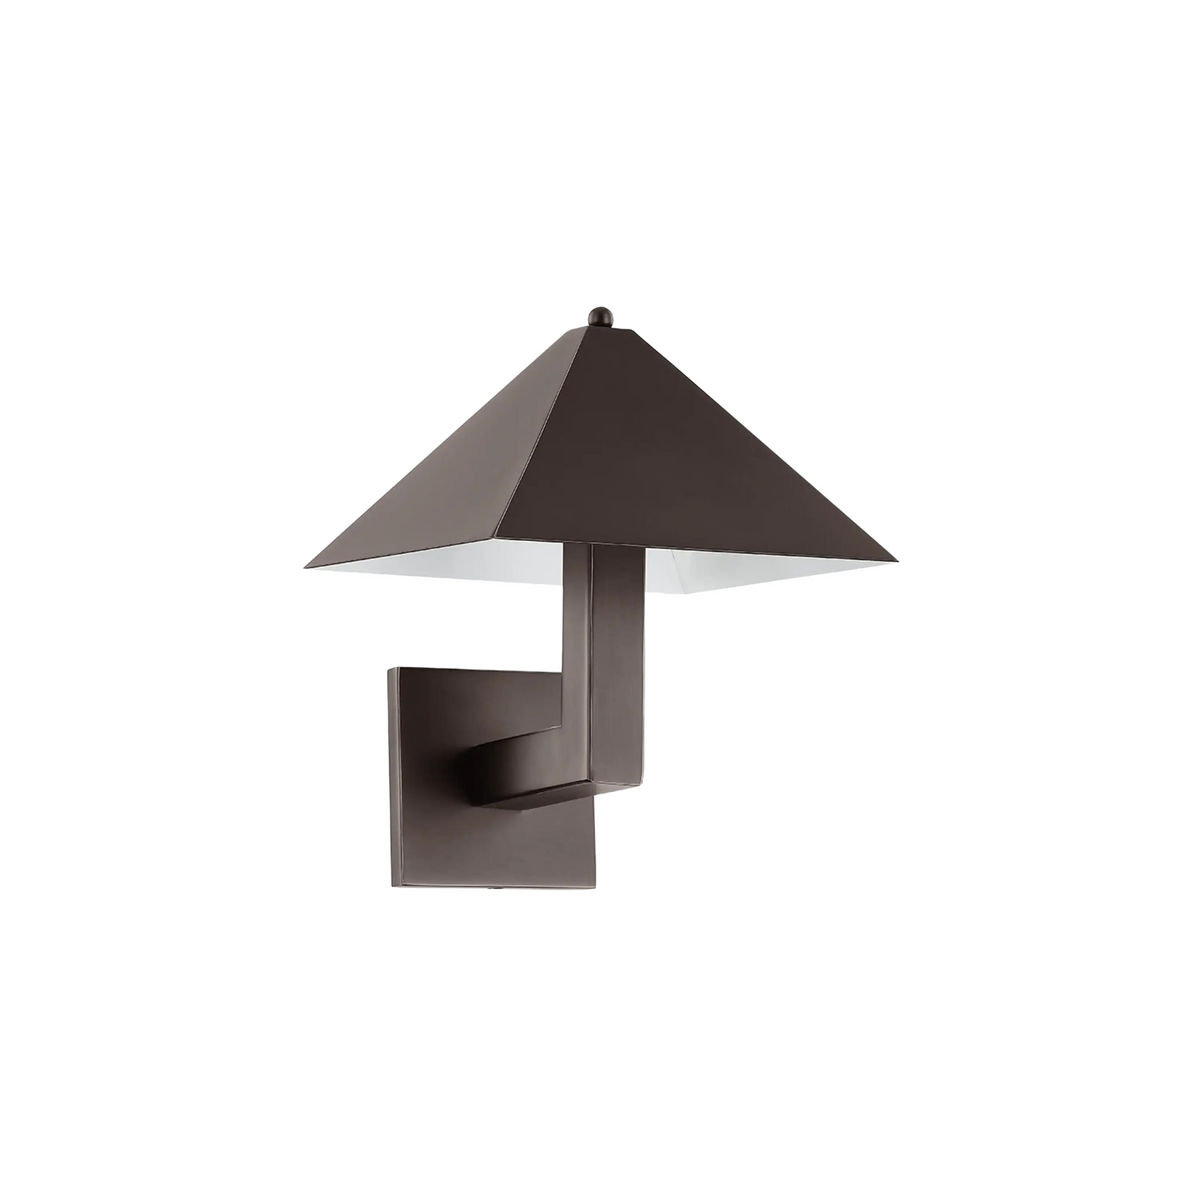 The Knight Sconce showcases a modern industrial aesthetic with a pyramid-shaped metal shade perched atop a thick square arm, extending seamlessly into a square backplate.